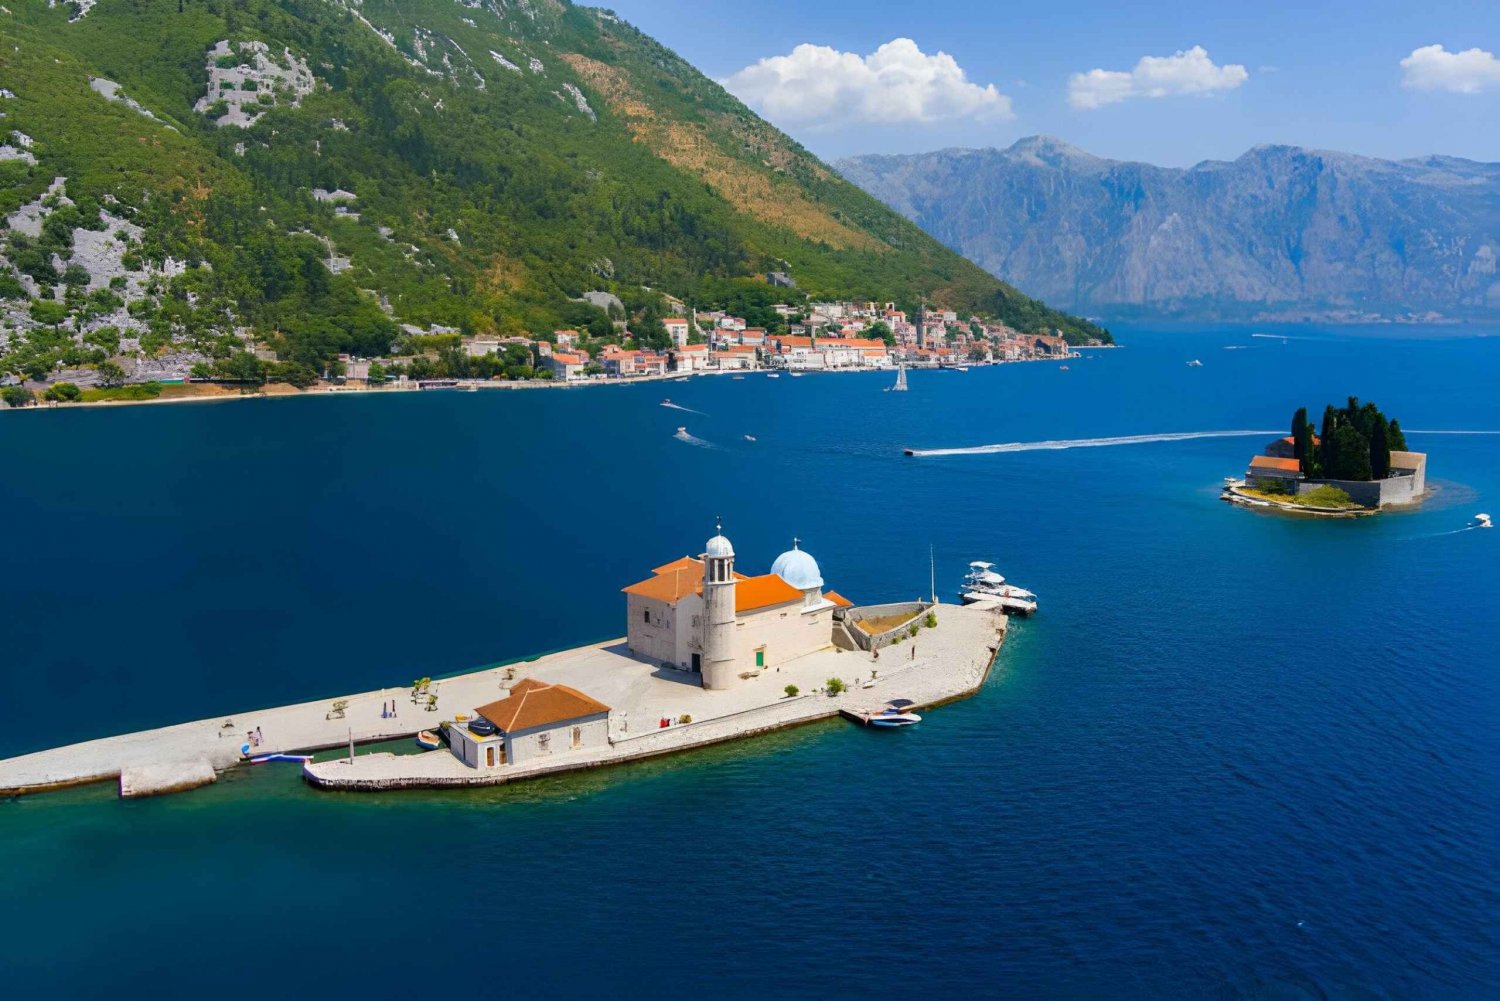 Kotor-Cable Car - Perast- Lady of the Rocks ( group tour )